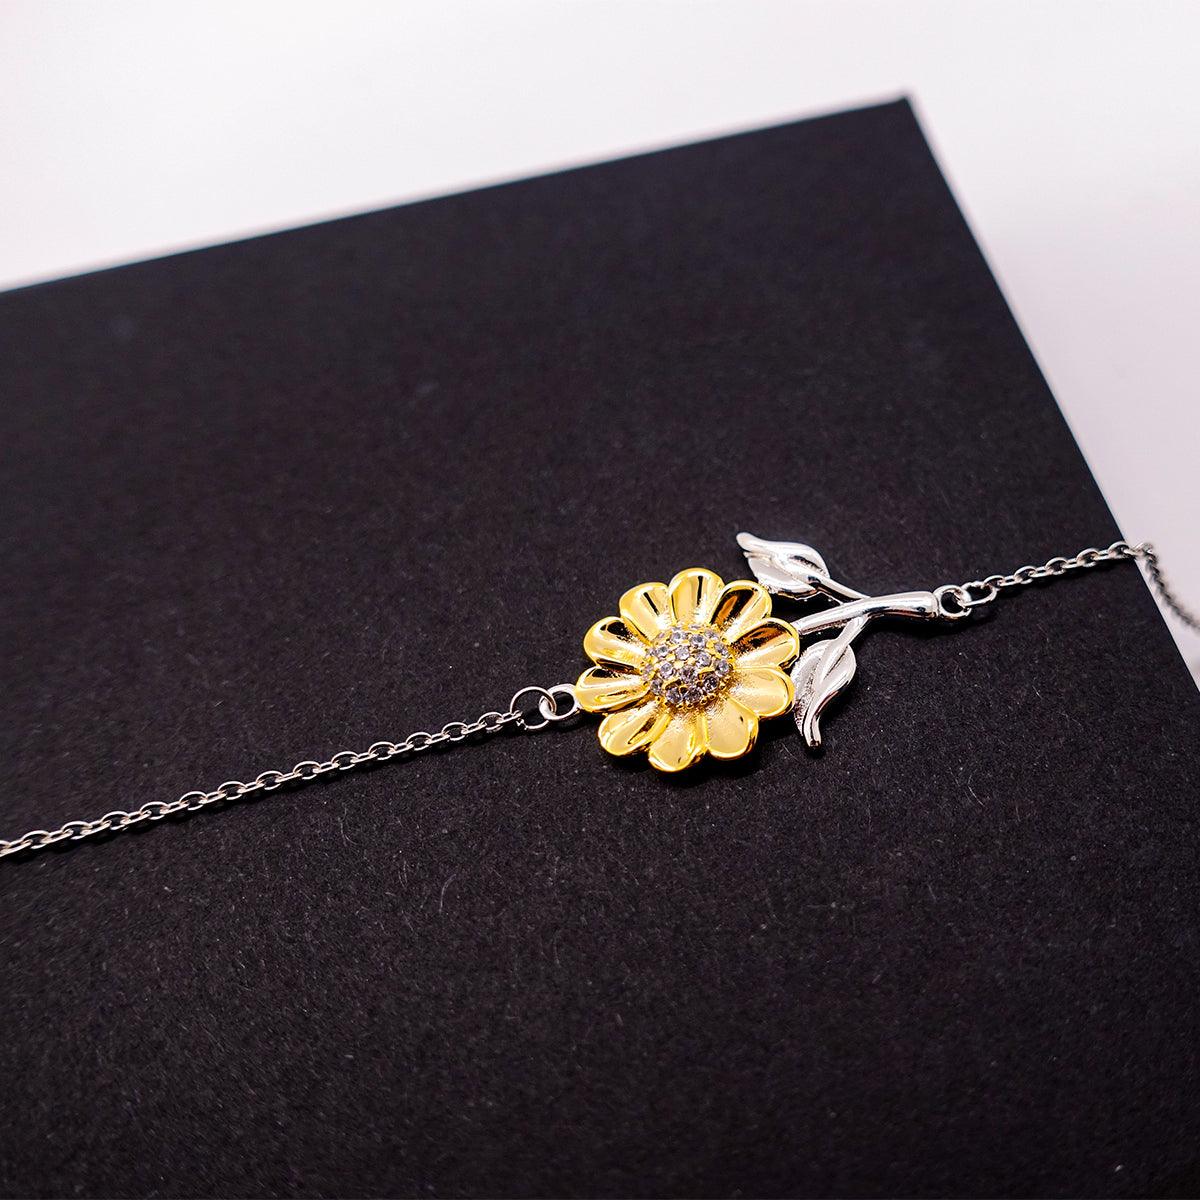 Color Guard DirectorSunflower Bracelet - Thanks for being who you are - Birthday Christmas Jewelry Gifts Coworkers Colleague Boss - Mallard Moon Gift Shop